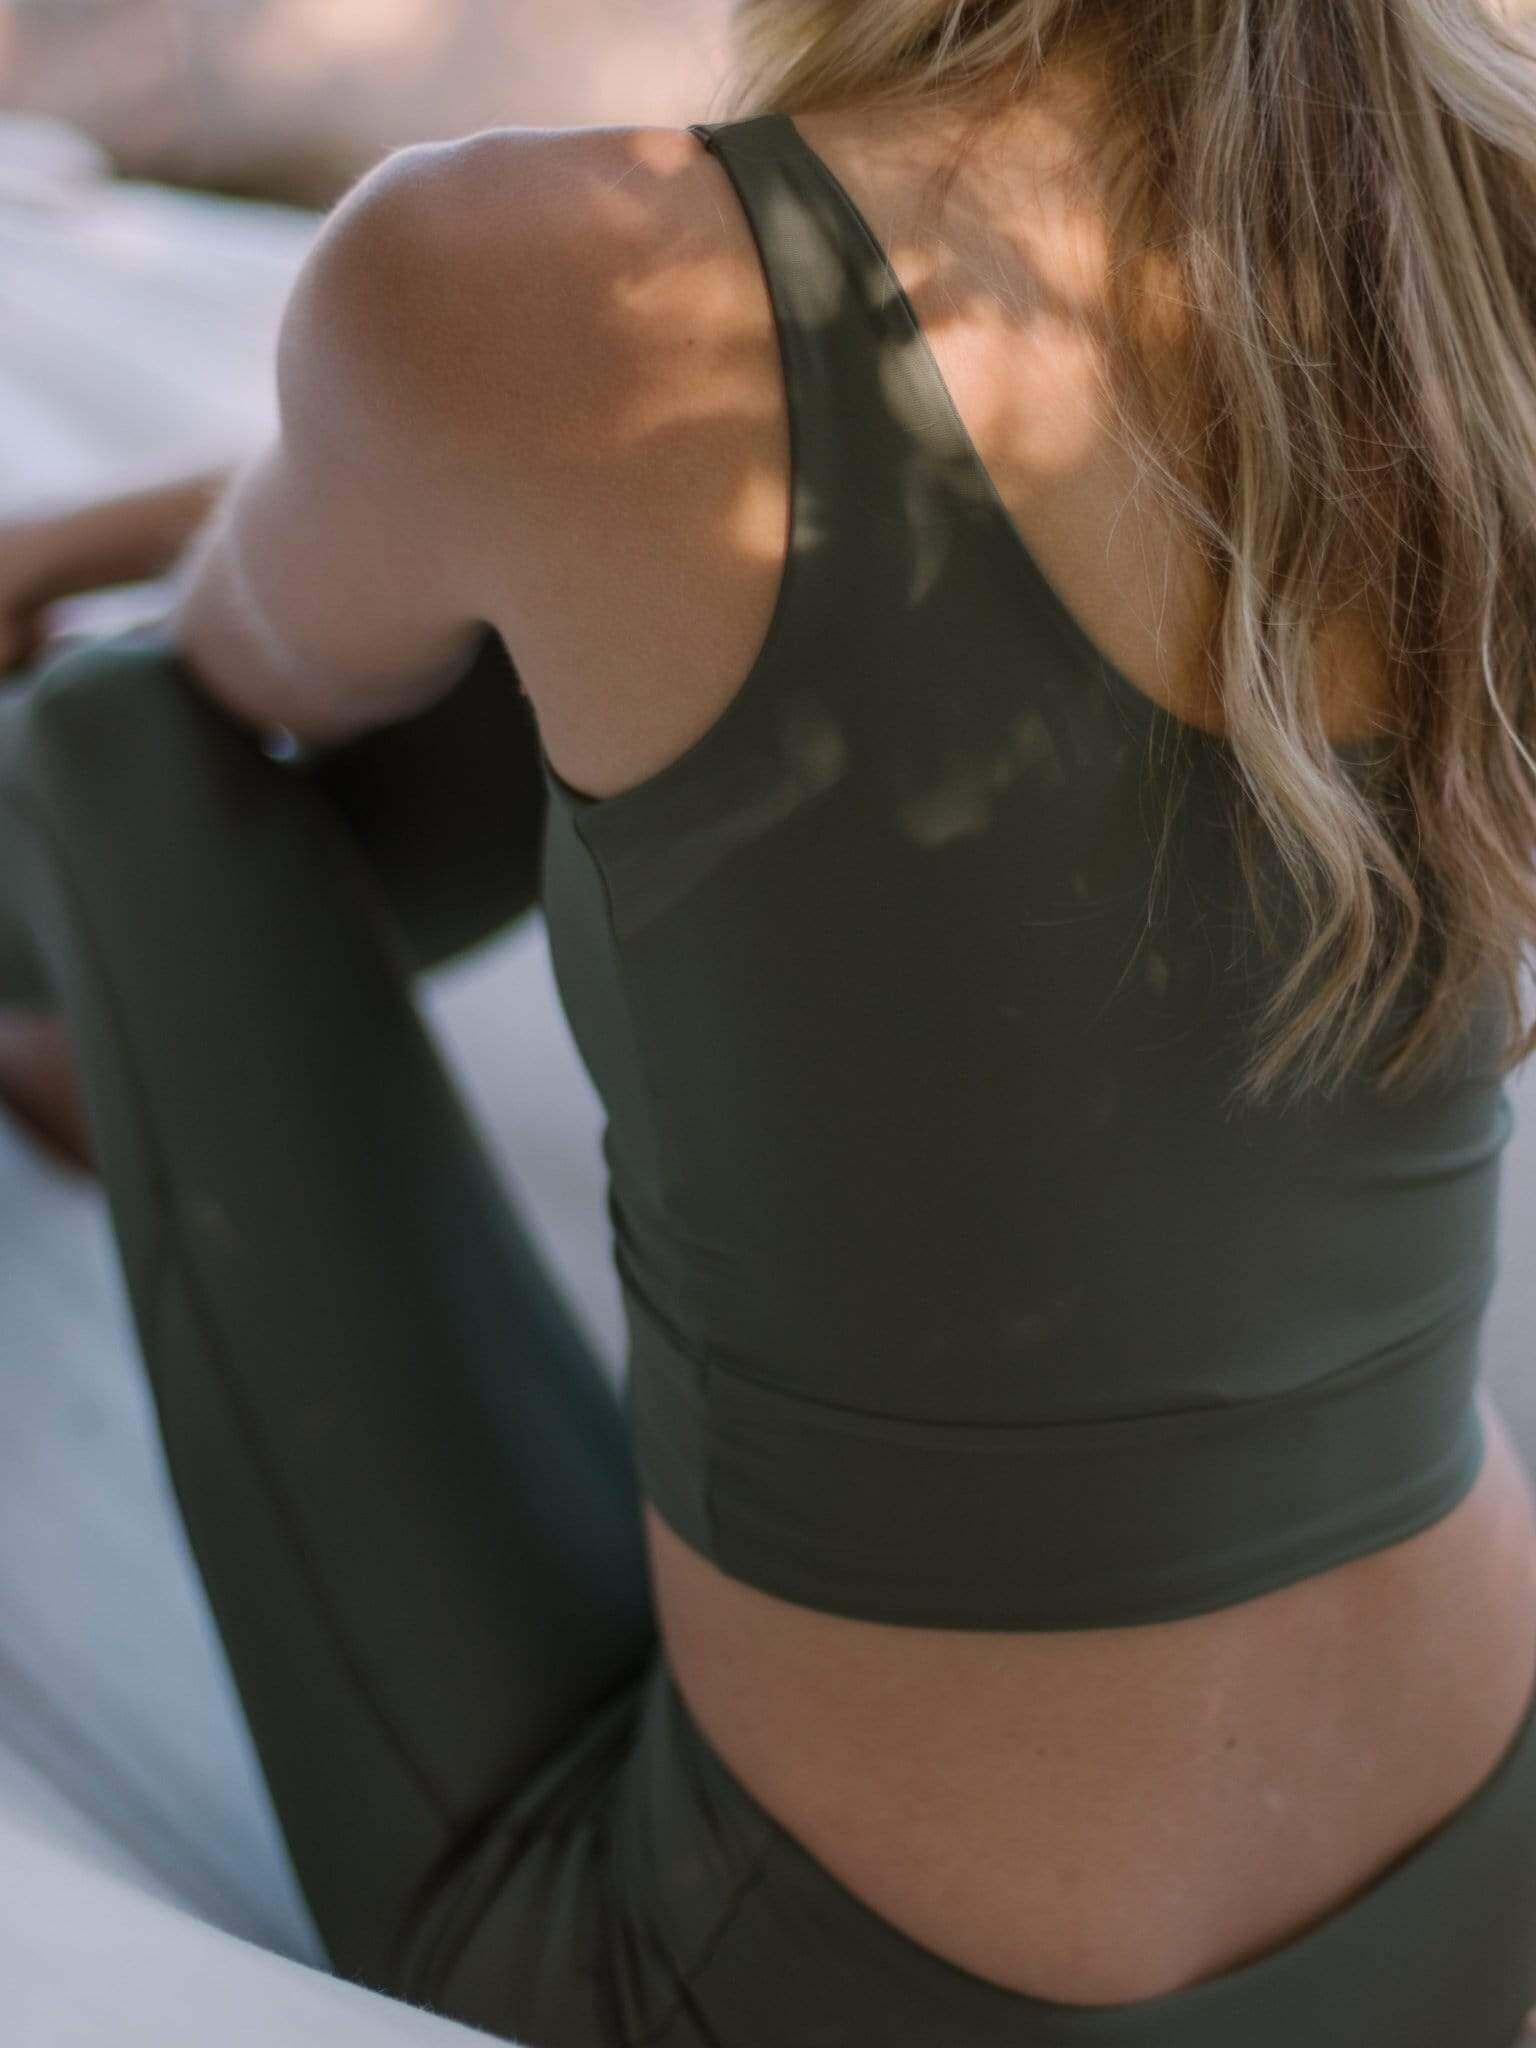 Cropped Scrunch Top made from ECONYL® yarn. - Spiritgirl Activewear